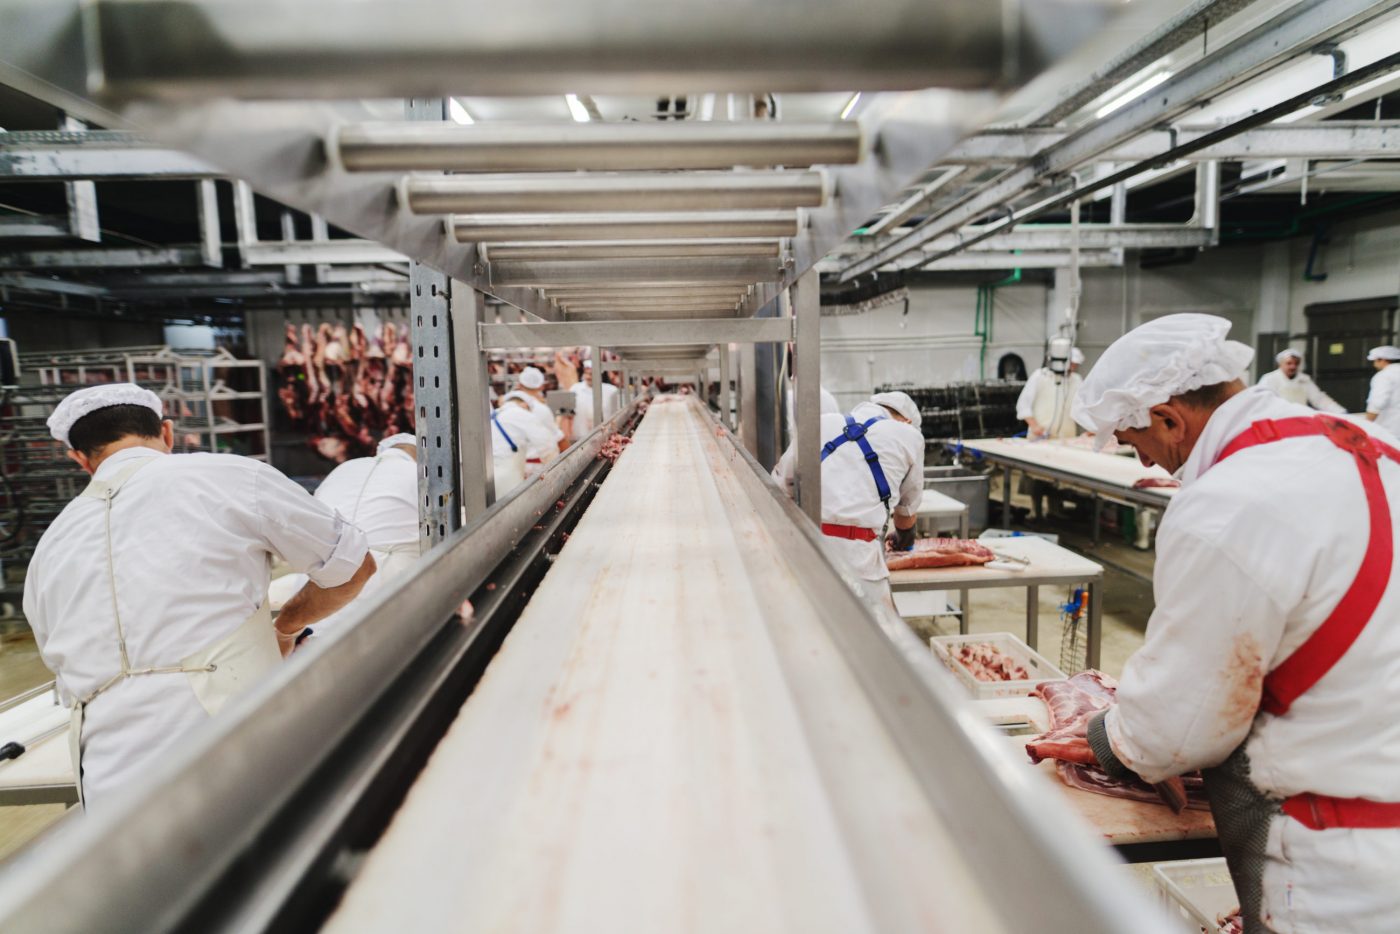 Workers standing in a meat processing facility